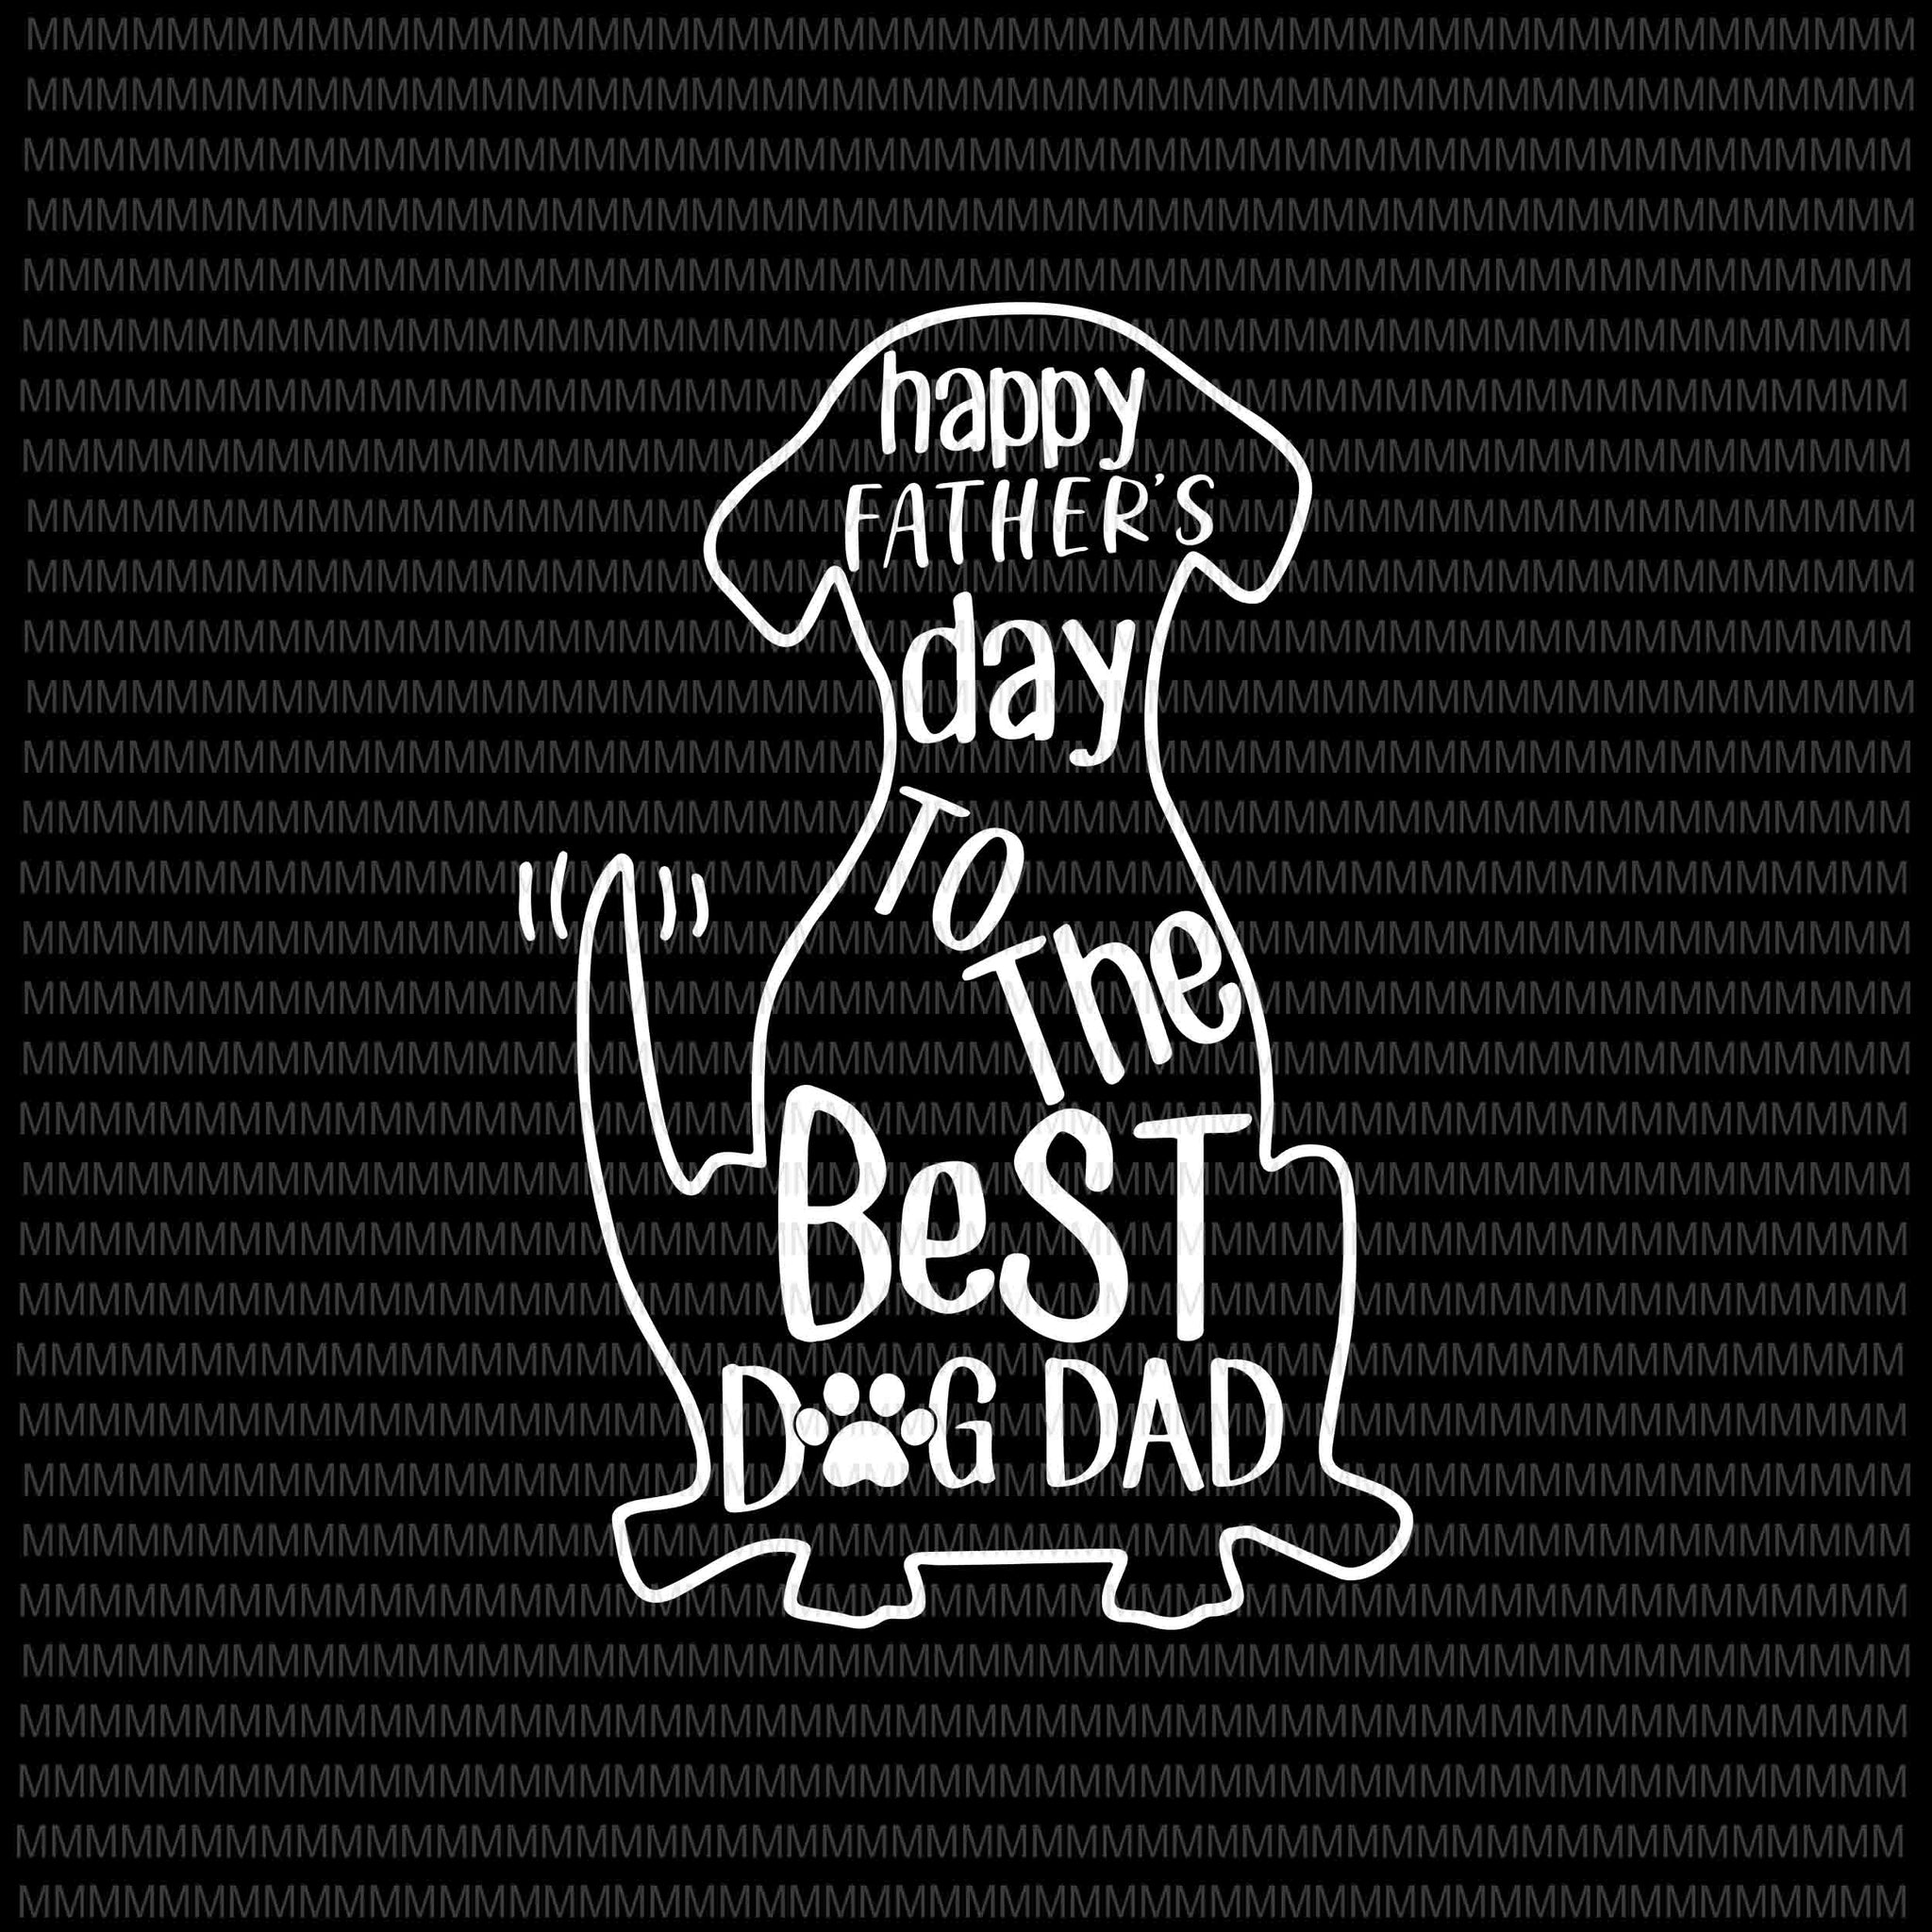 Happy Father's day to the best dog dad svg, Father's day svg, Father's day vector, Dog Dad svg, Dog dad vector, svg, png, dxf, eps, ai file